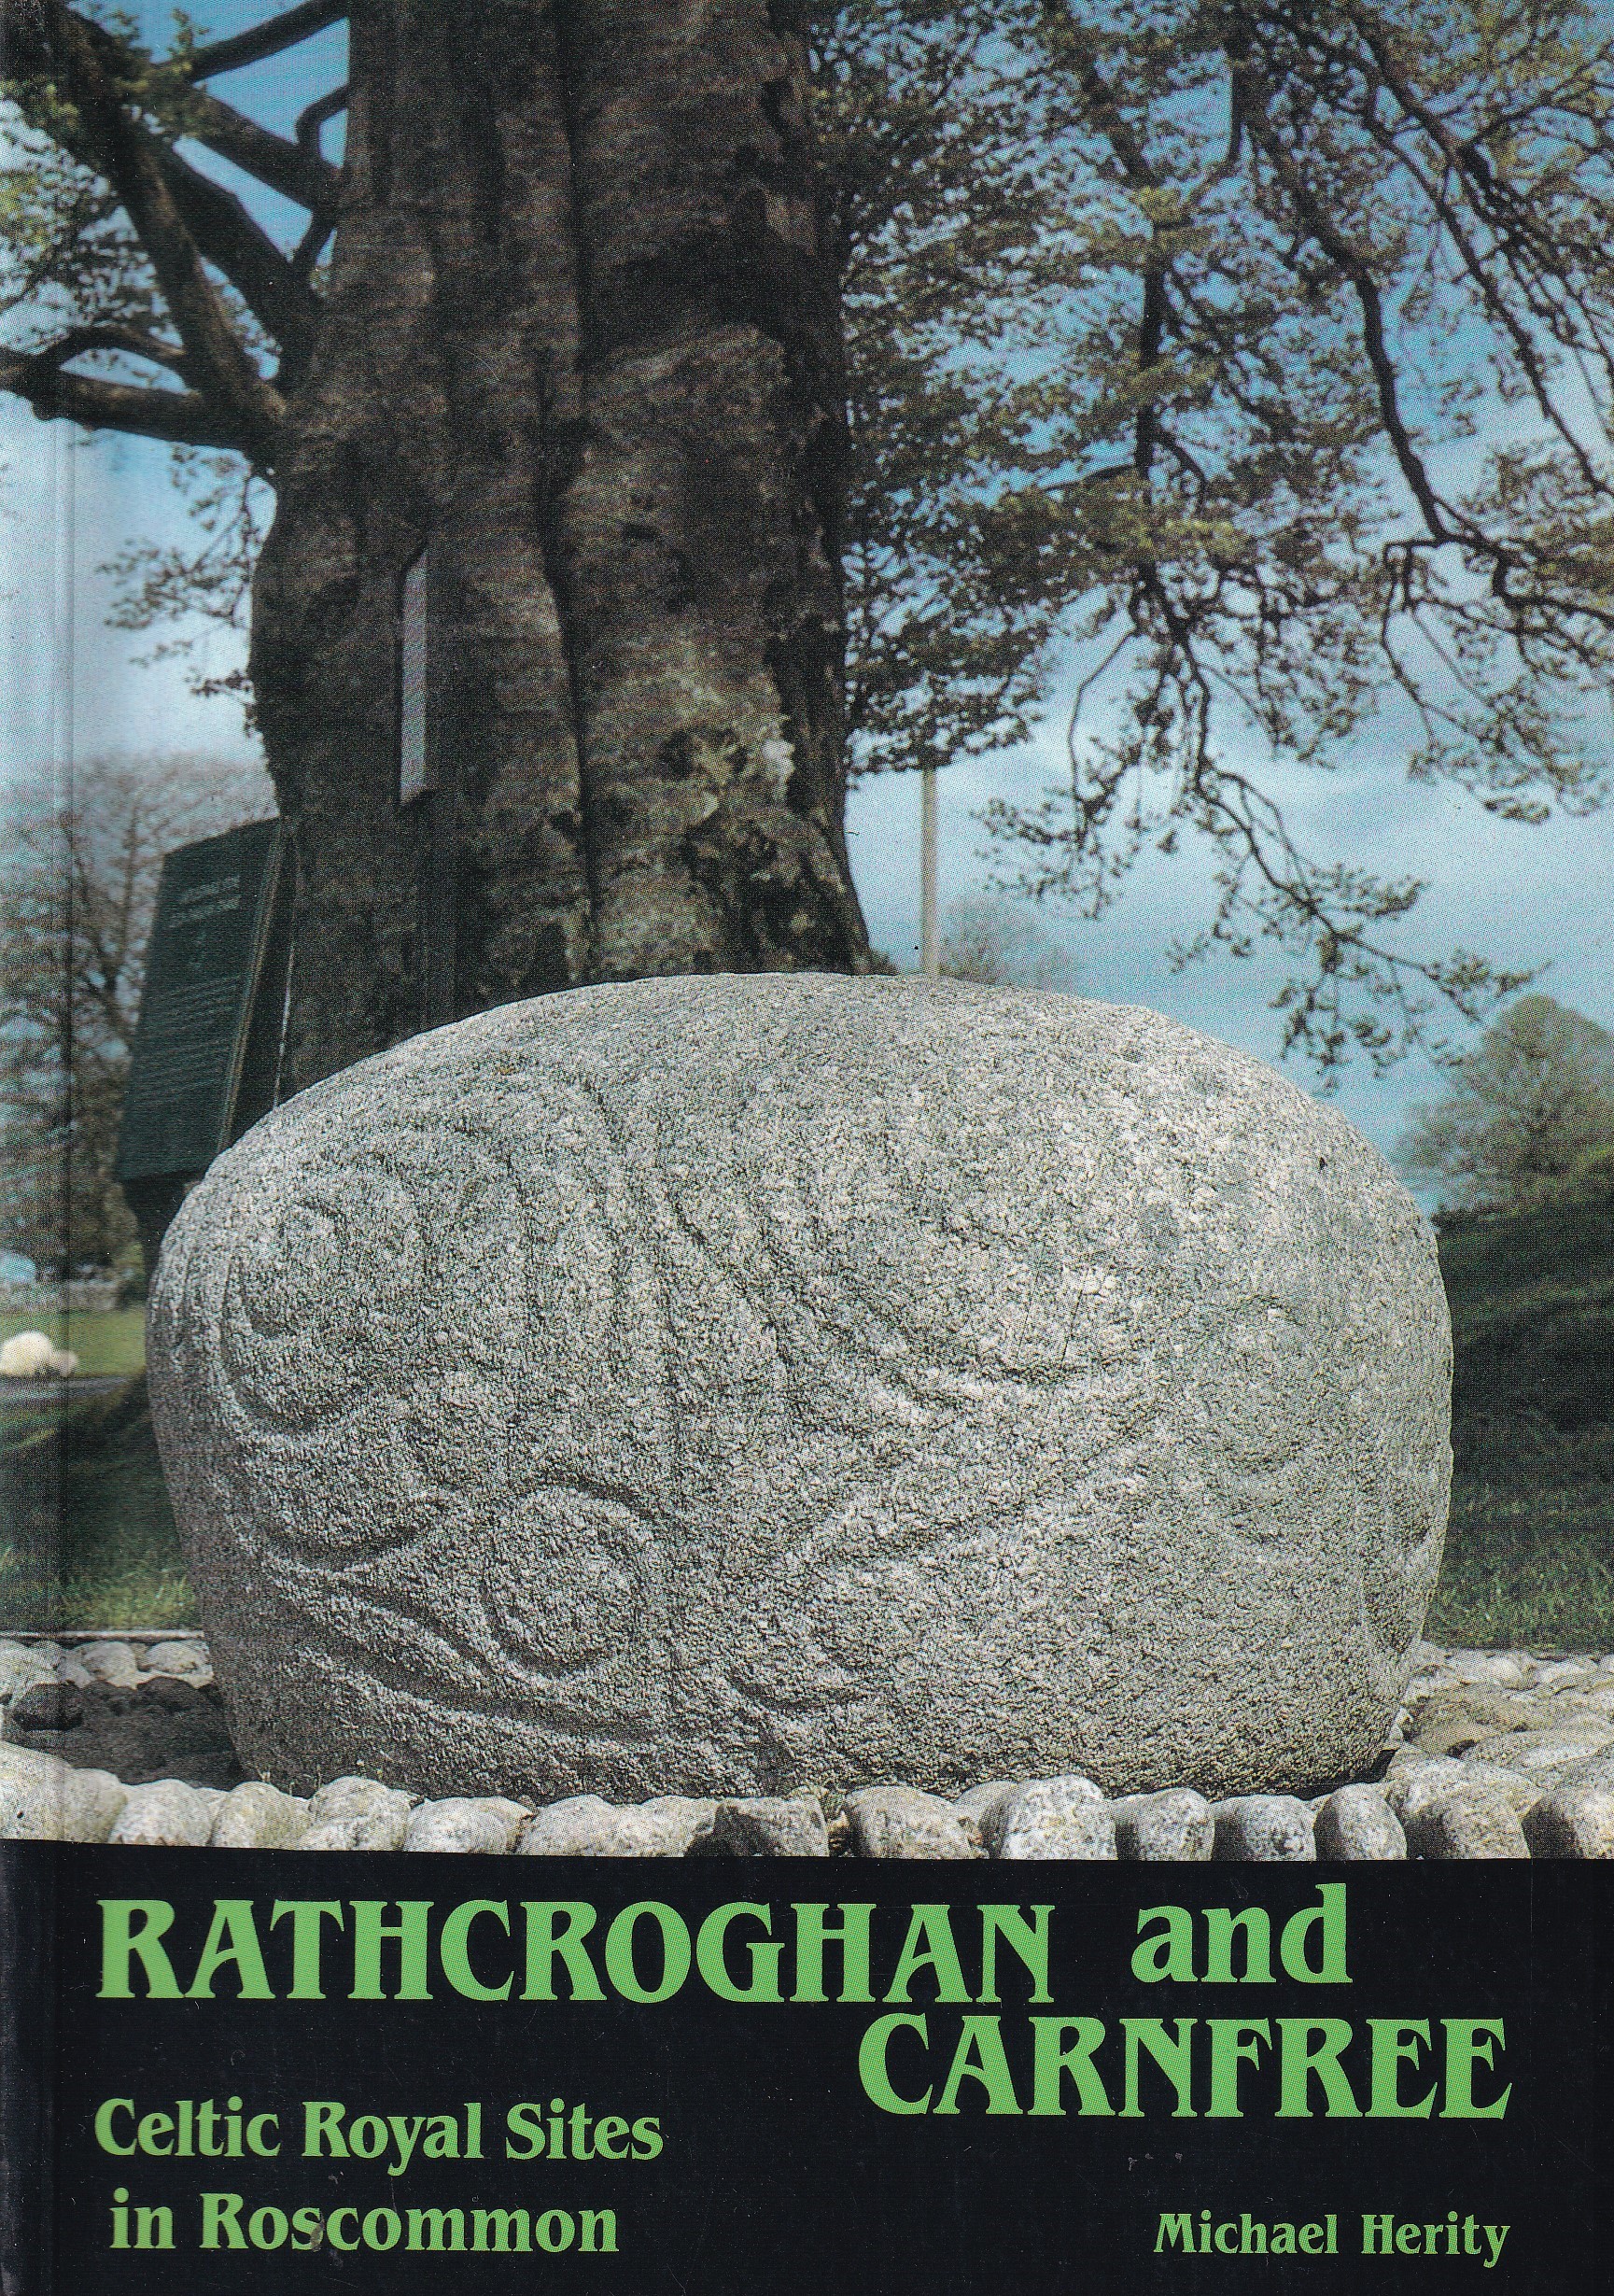 Rathcroghan and Carnfree: Celtic Royal Sites in Roscommon | Michael Herity | Charlie Byrne's